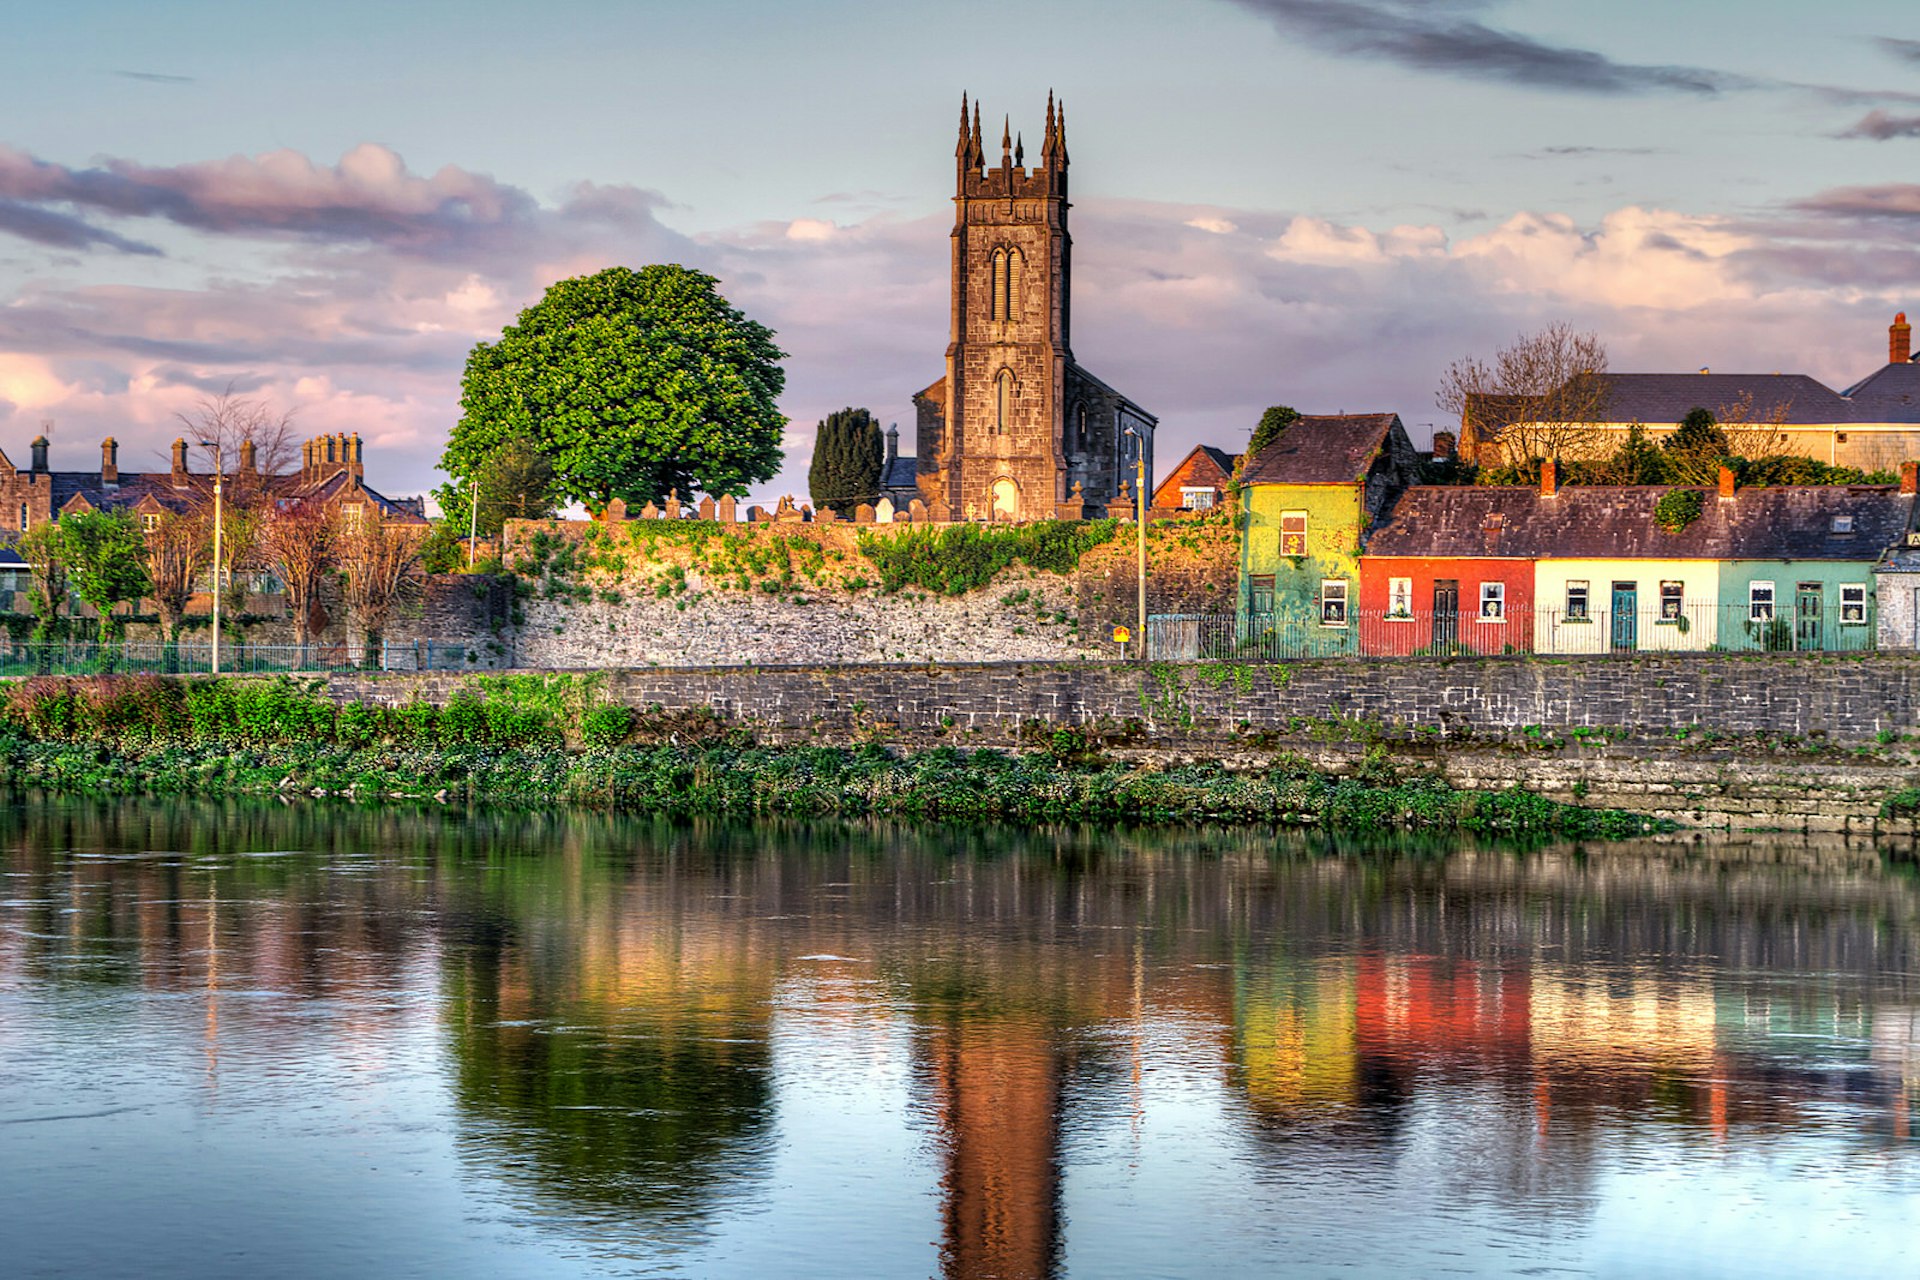 Shannon river scenery in Limerick city, Ireland. A church and colourful houses are viewed from the other side of the river